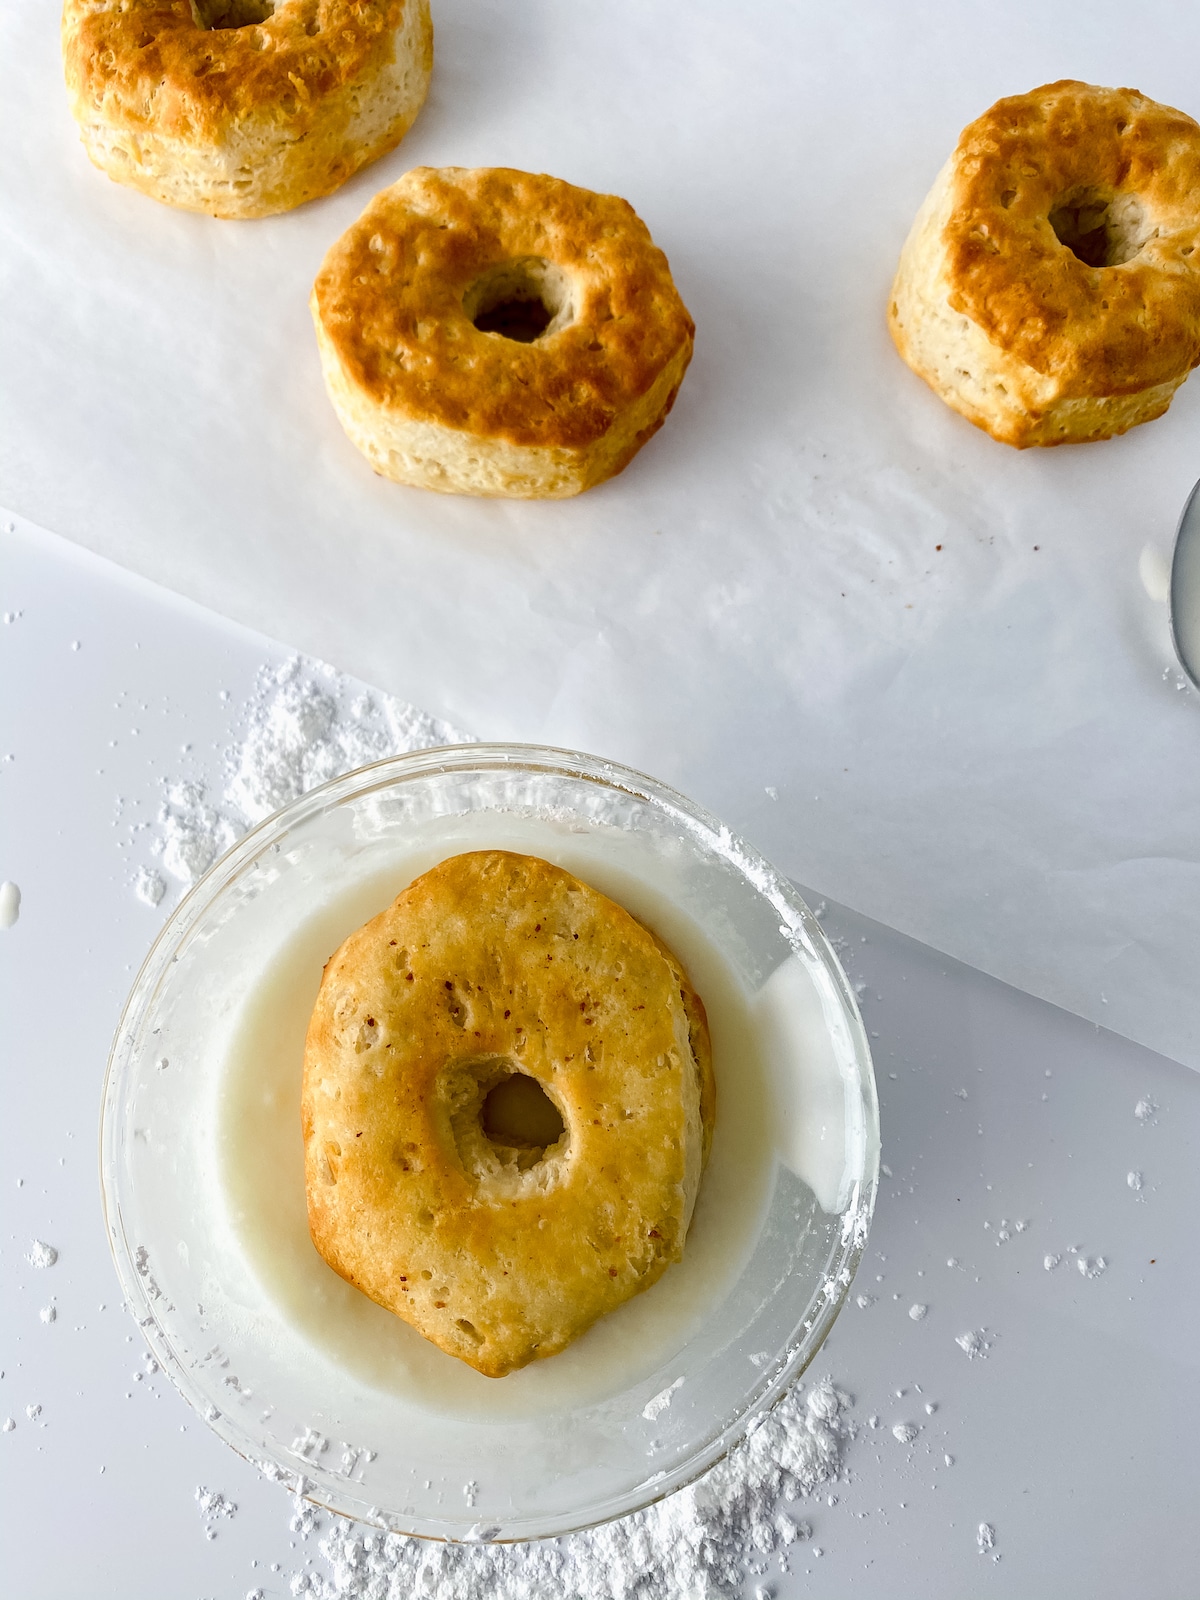 Dipping air fryer donuts